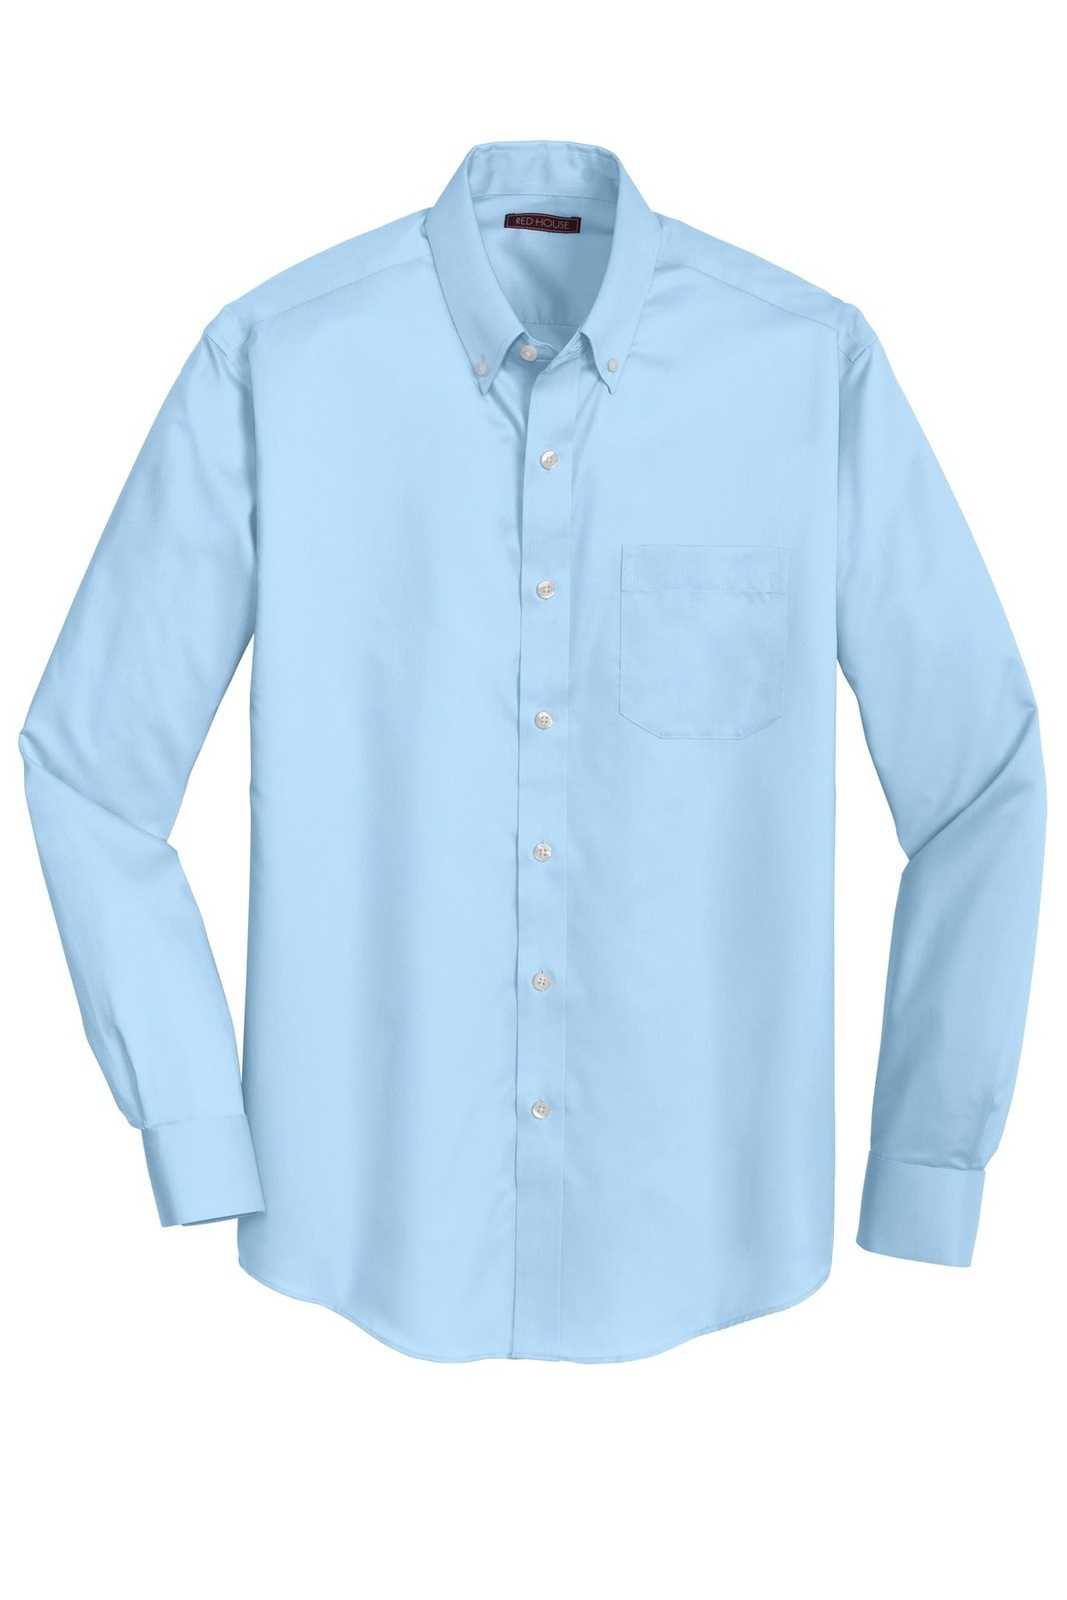 Red House RH78 Non-Iron Twill Shirt - Heritage Blue - HIT a Double - 5